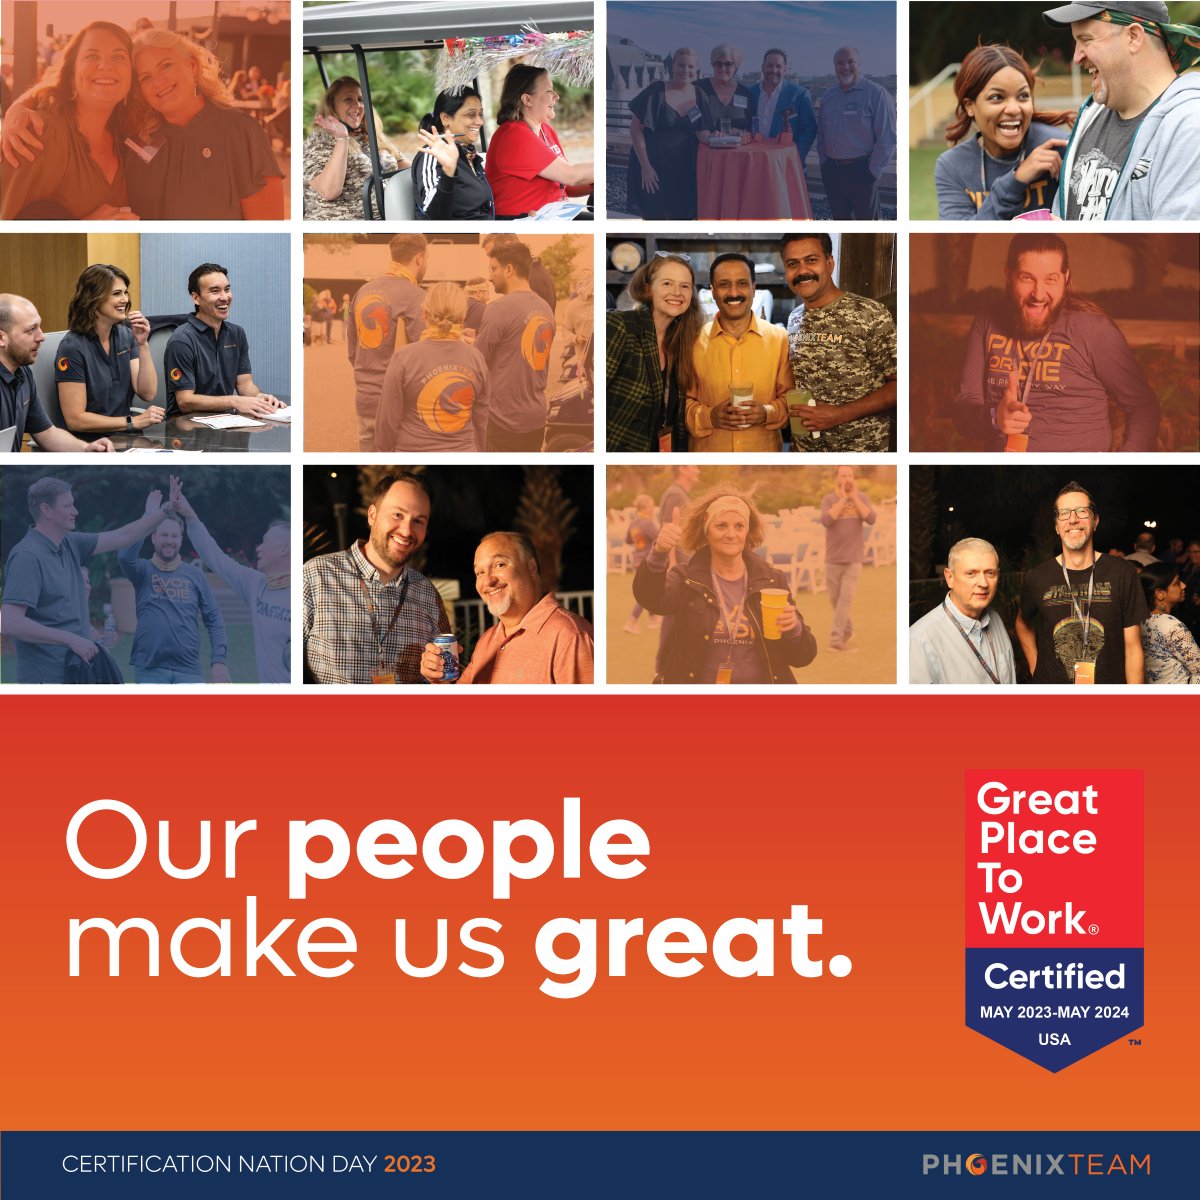 Today is Great Place to Work 🎉Celebration Nation Day🎉, and we celebrate our team members for contributing to this honor and making PhoenixTeam THE Great Place to Work!  #GPTWCertified #GreatPlaceToWork #CertificationNationDay #Hiring